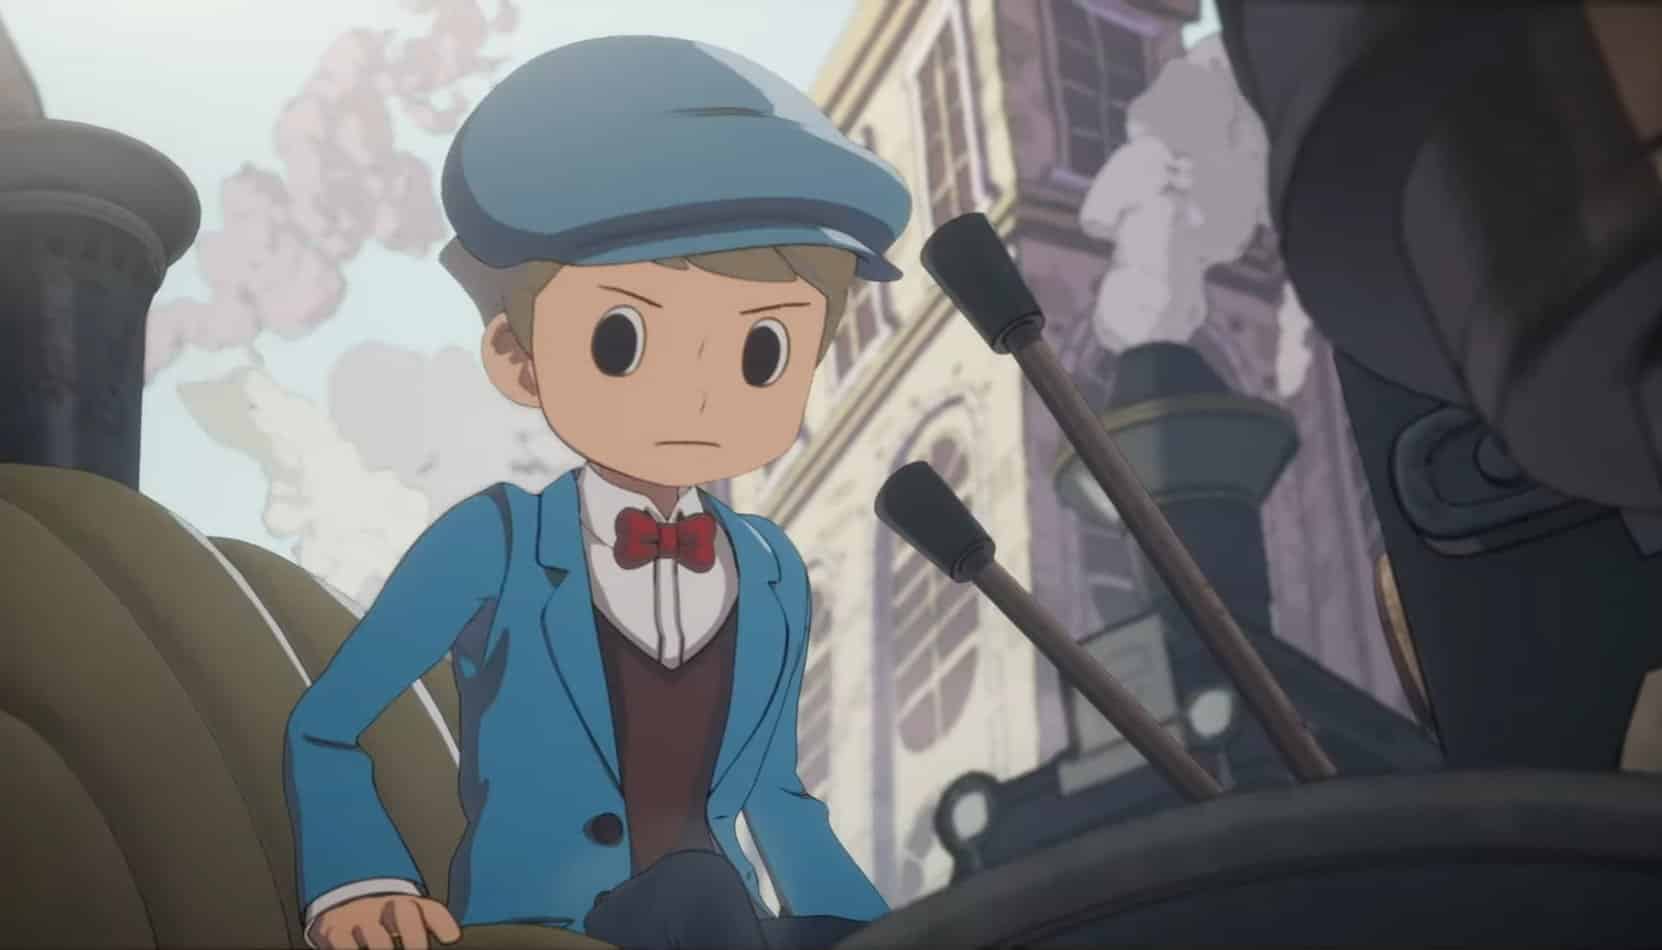 Professor Layton and the New World of Steam Occurs 1 Year After Unwound Future; Setting & Cast Introduced